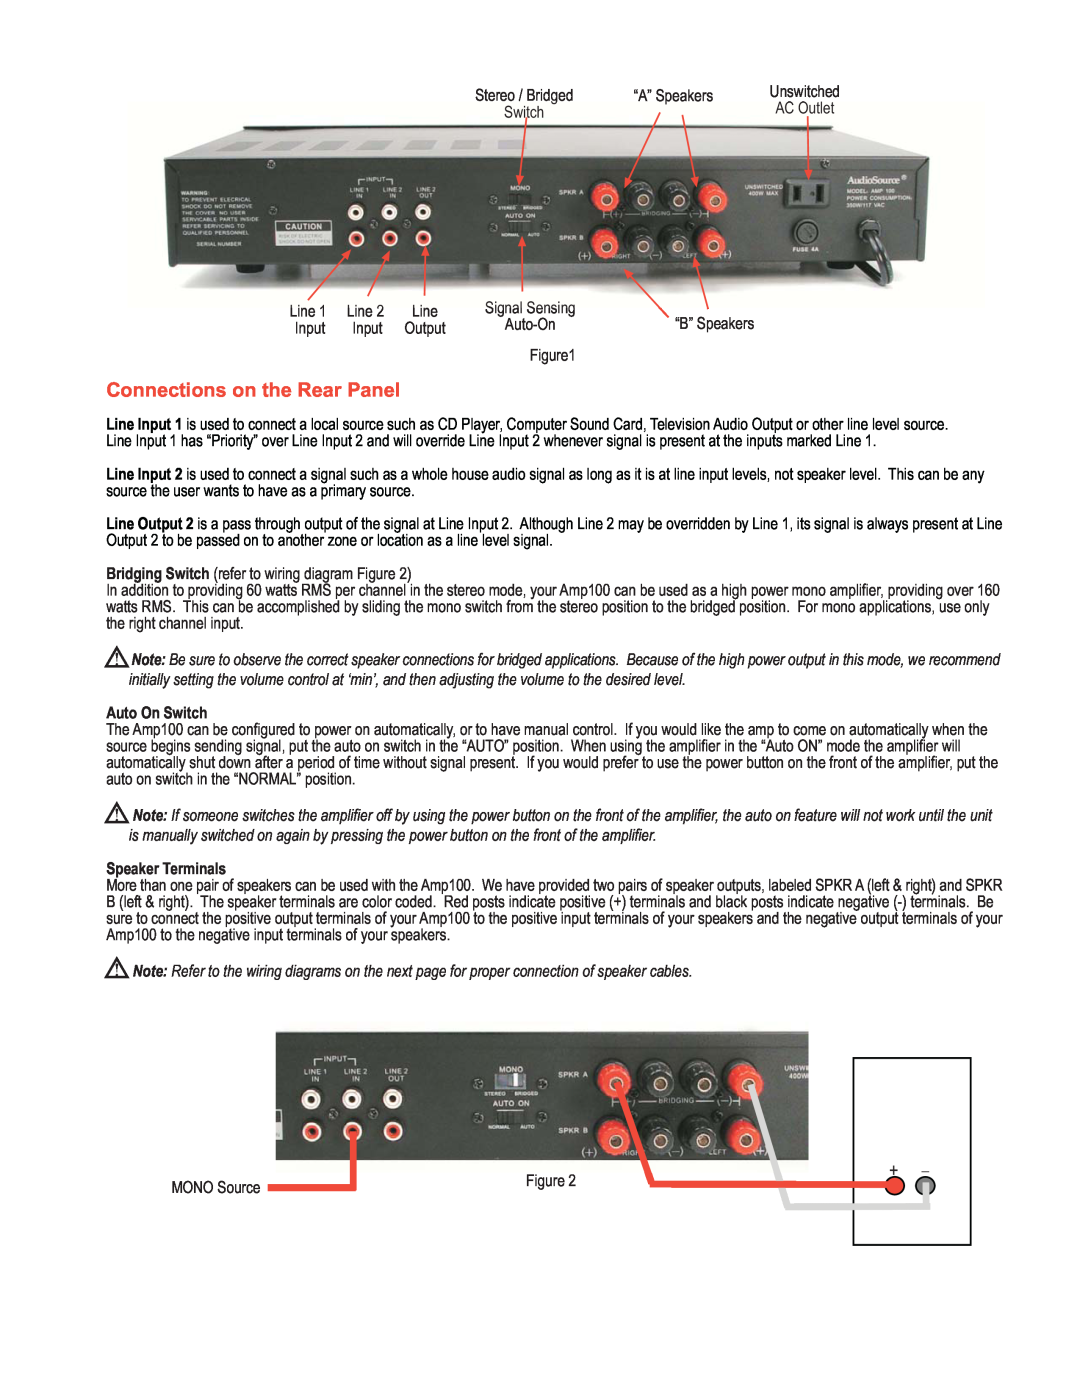 AudioSource AMP 100 technical specifications Connections on the Rear Panel, Auto On Switch, Speaker Terminals 